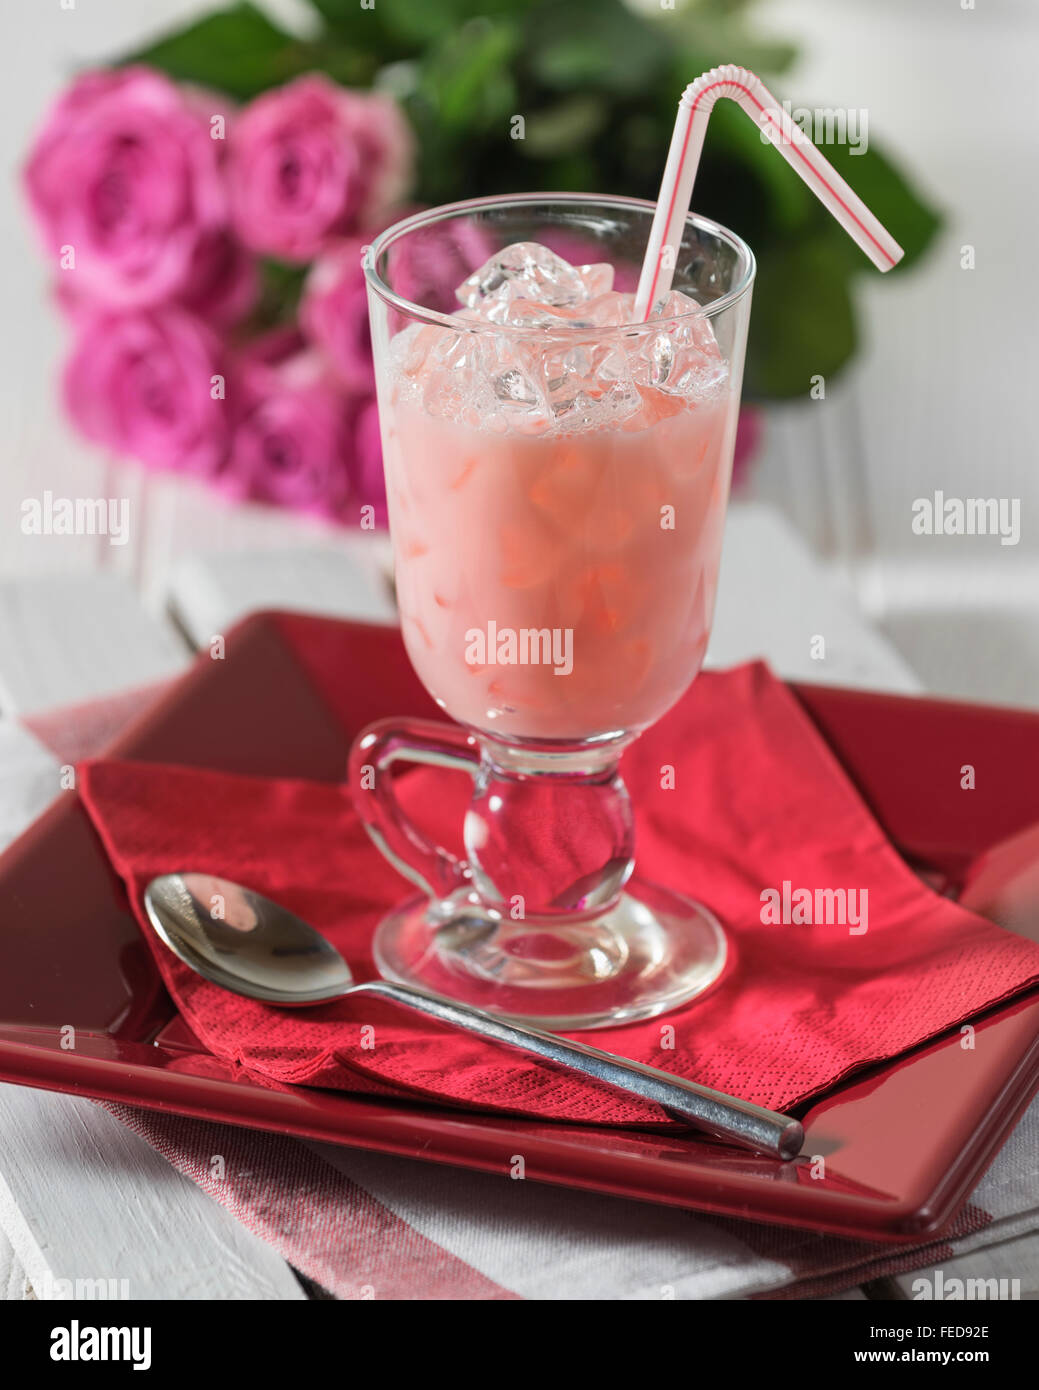 Rose bandung. Rosewater flavour milk drink. South East Asia Stock Photo